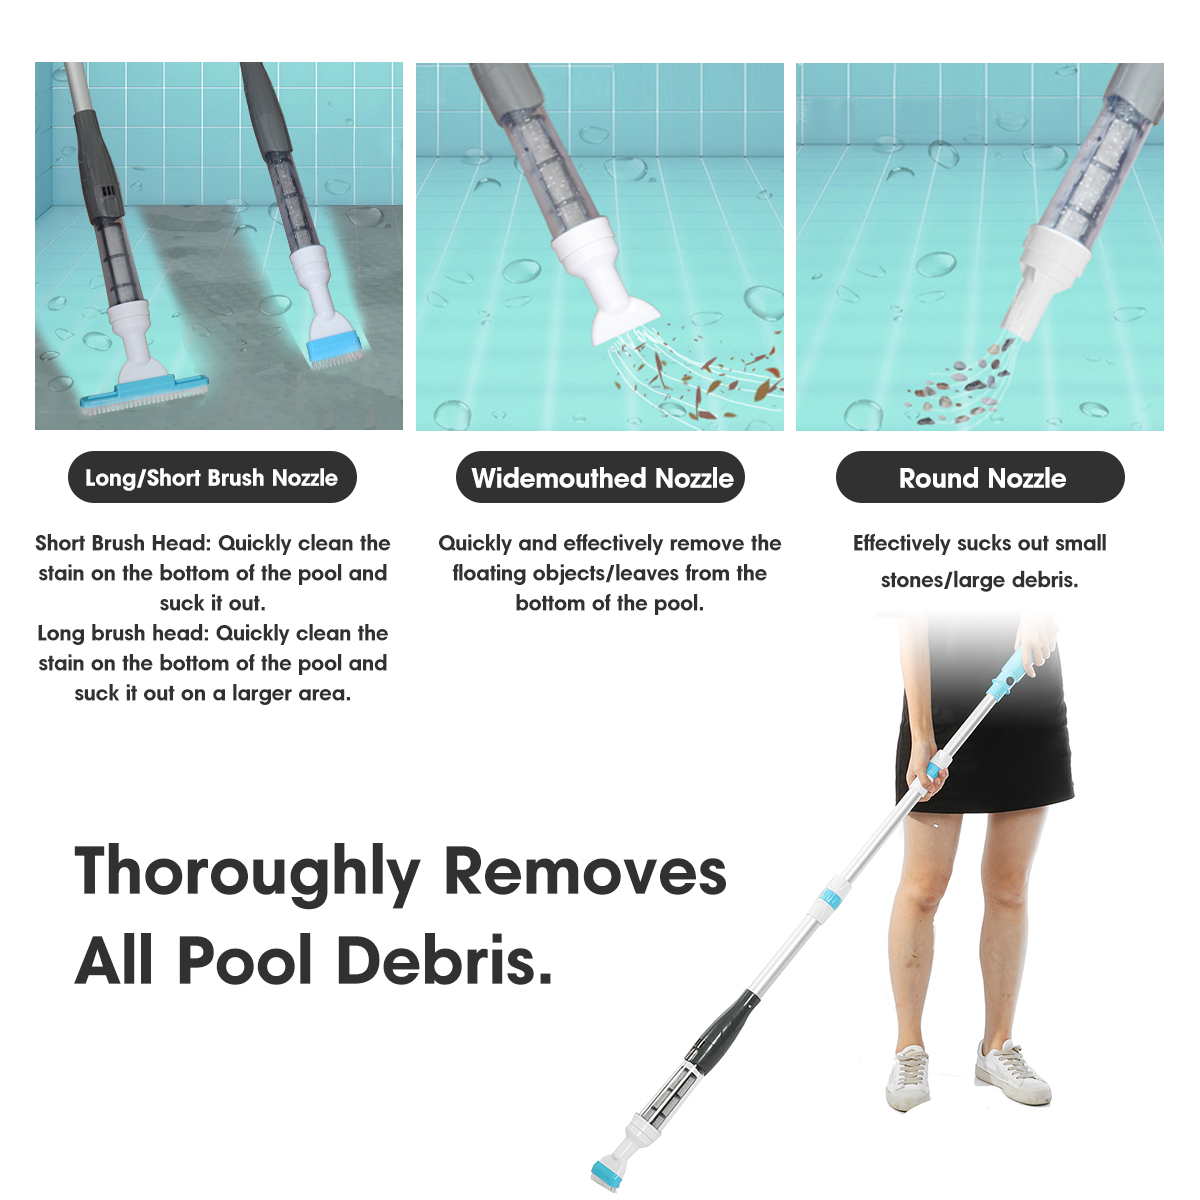 Handheld-Cordless-Swimming-Pool-Vacuum-Cleaner-Waterproof-IPX8-Rechargeable-Vac-Above-Ground-Cleanin-1559729-9